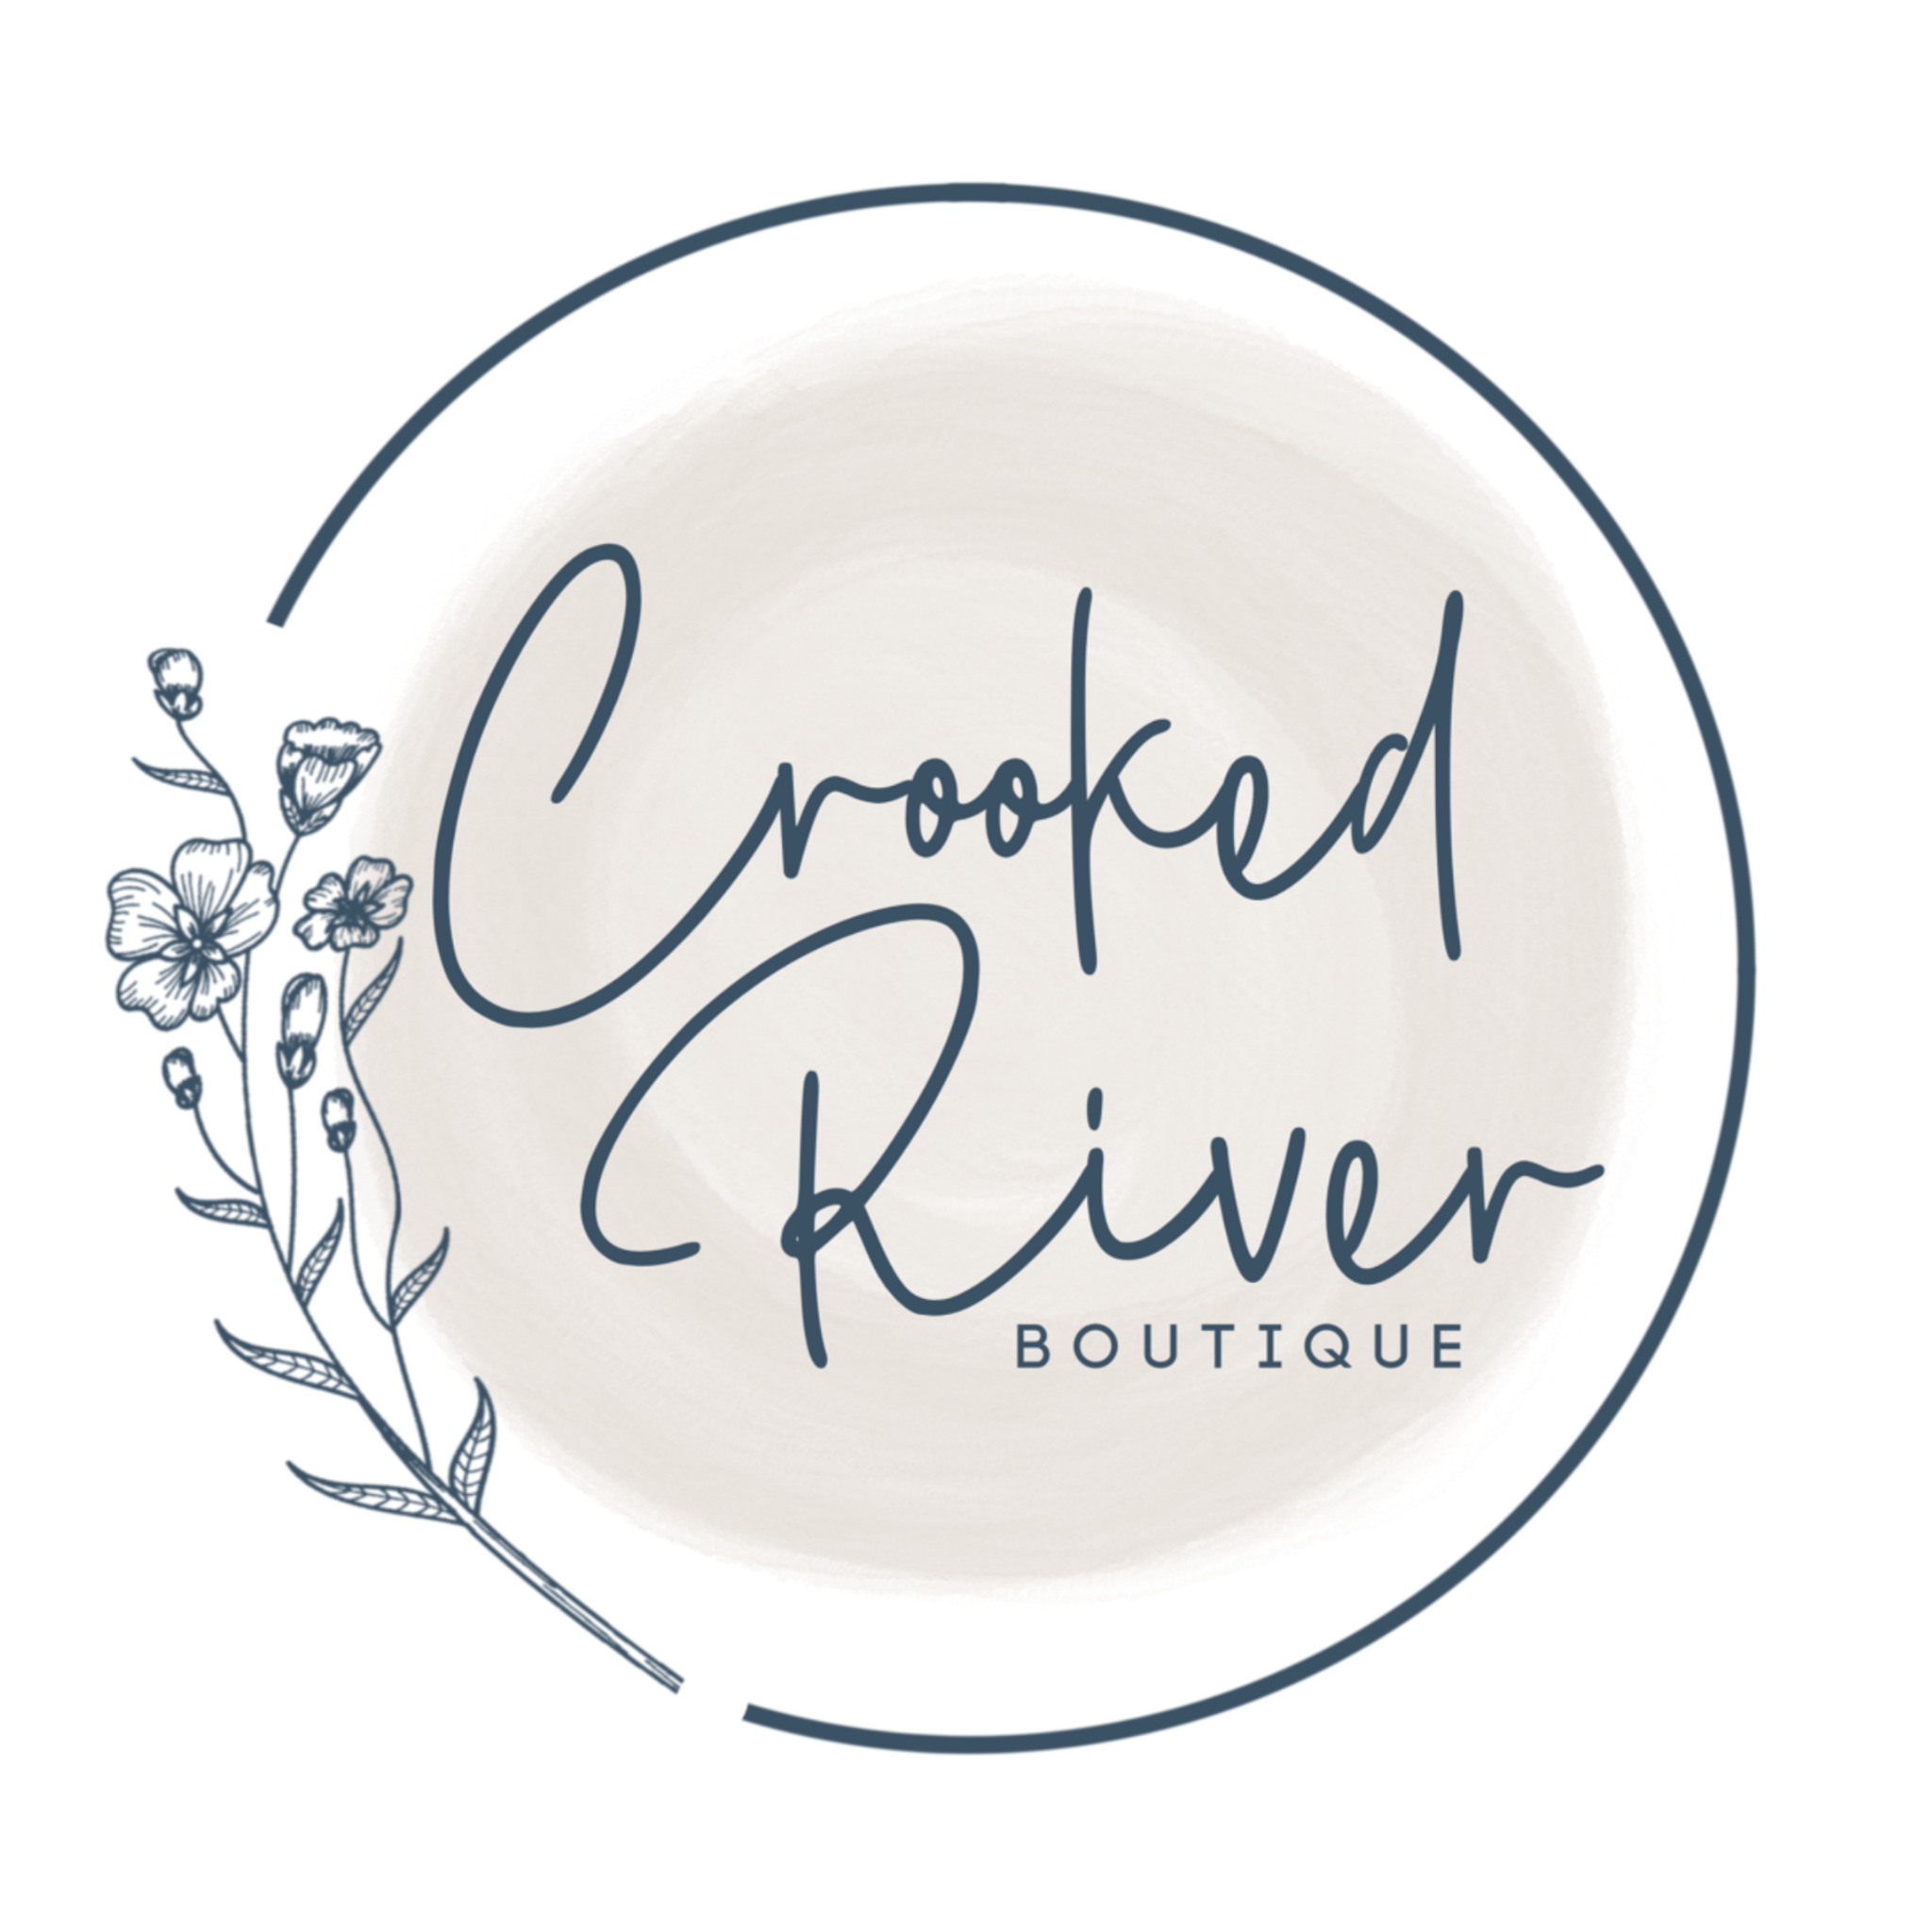 Crooked River Boutique